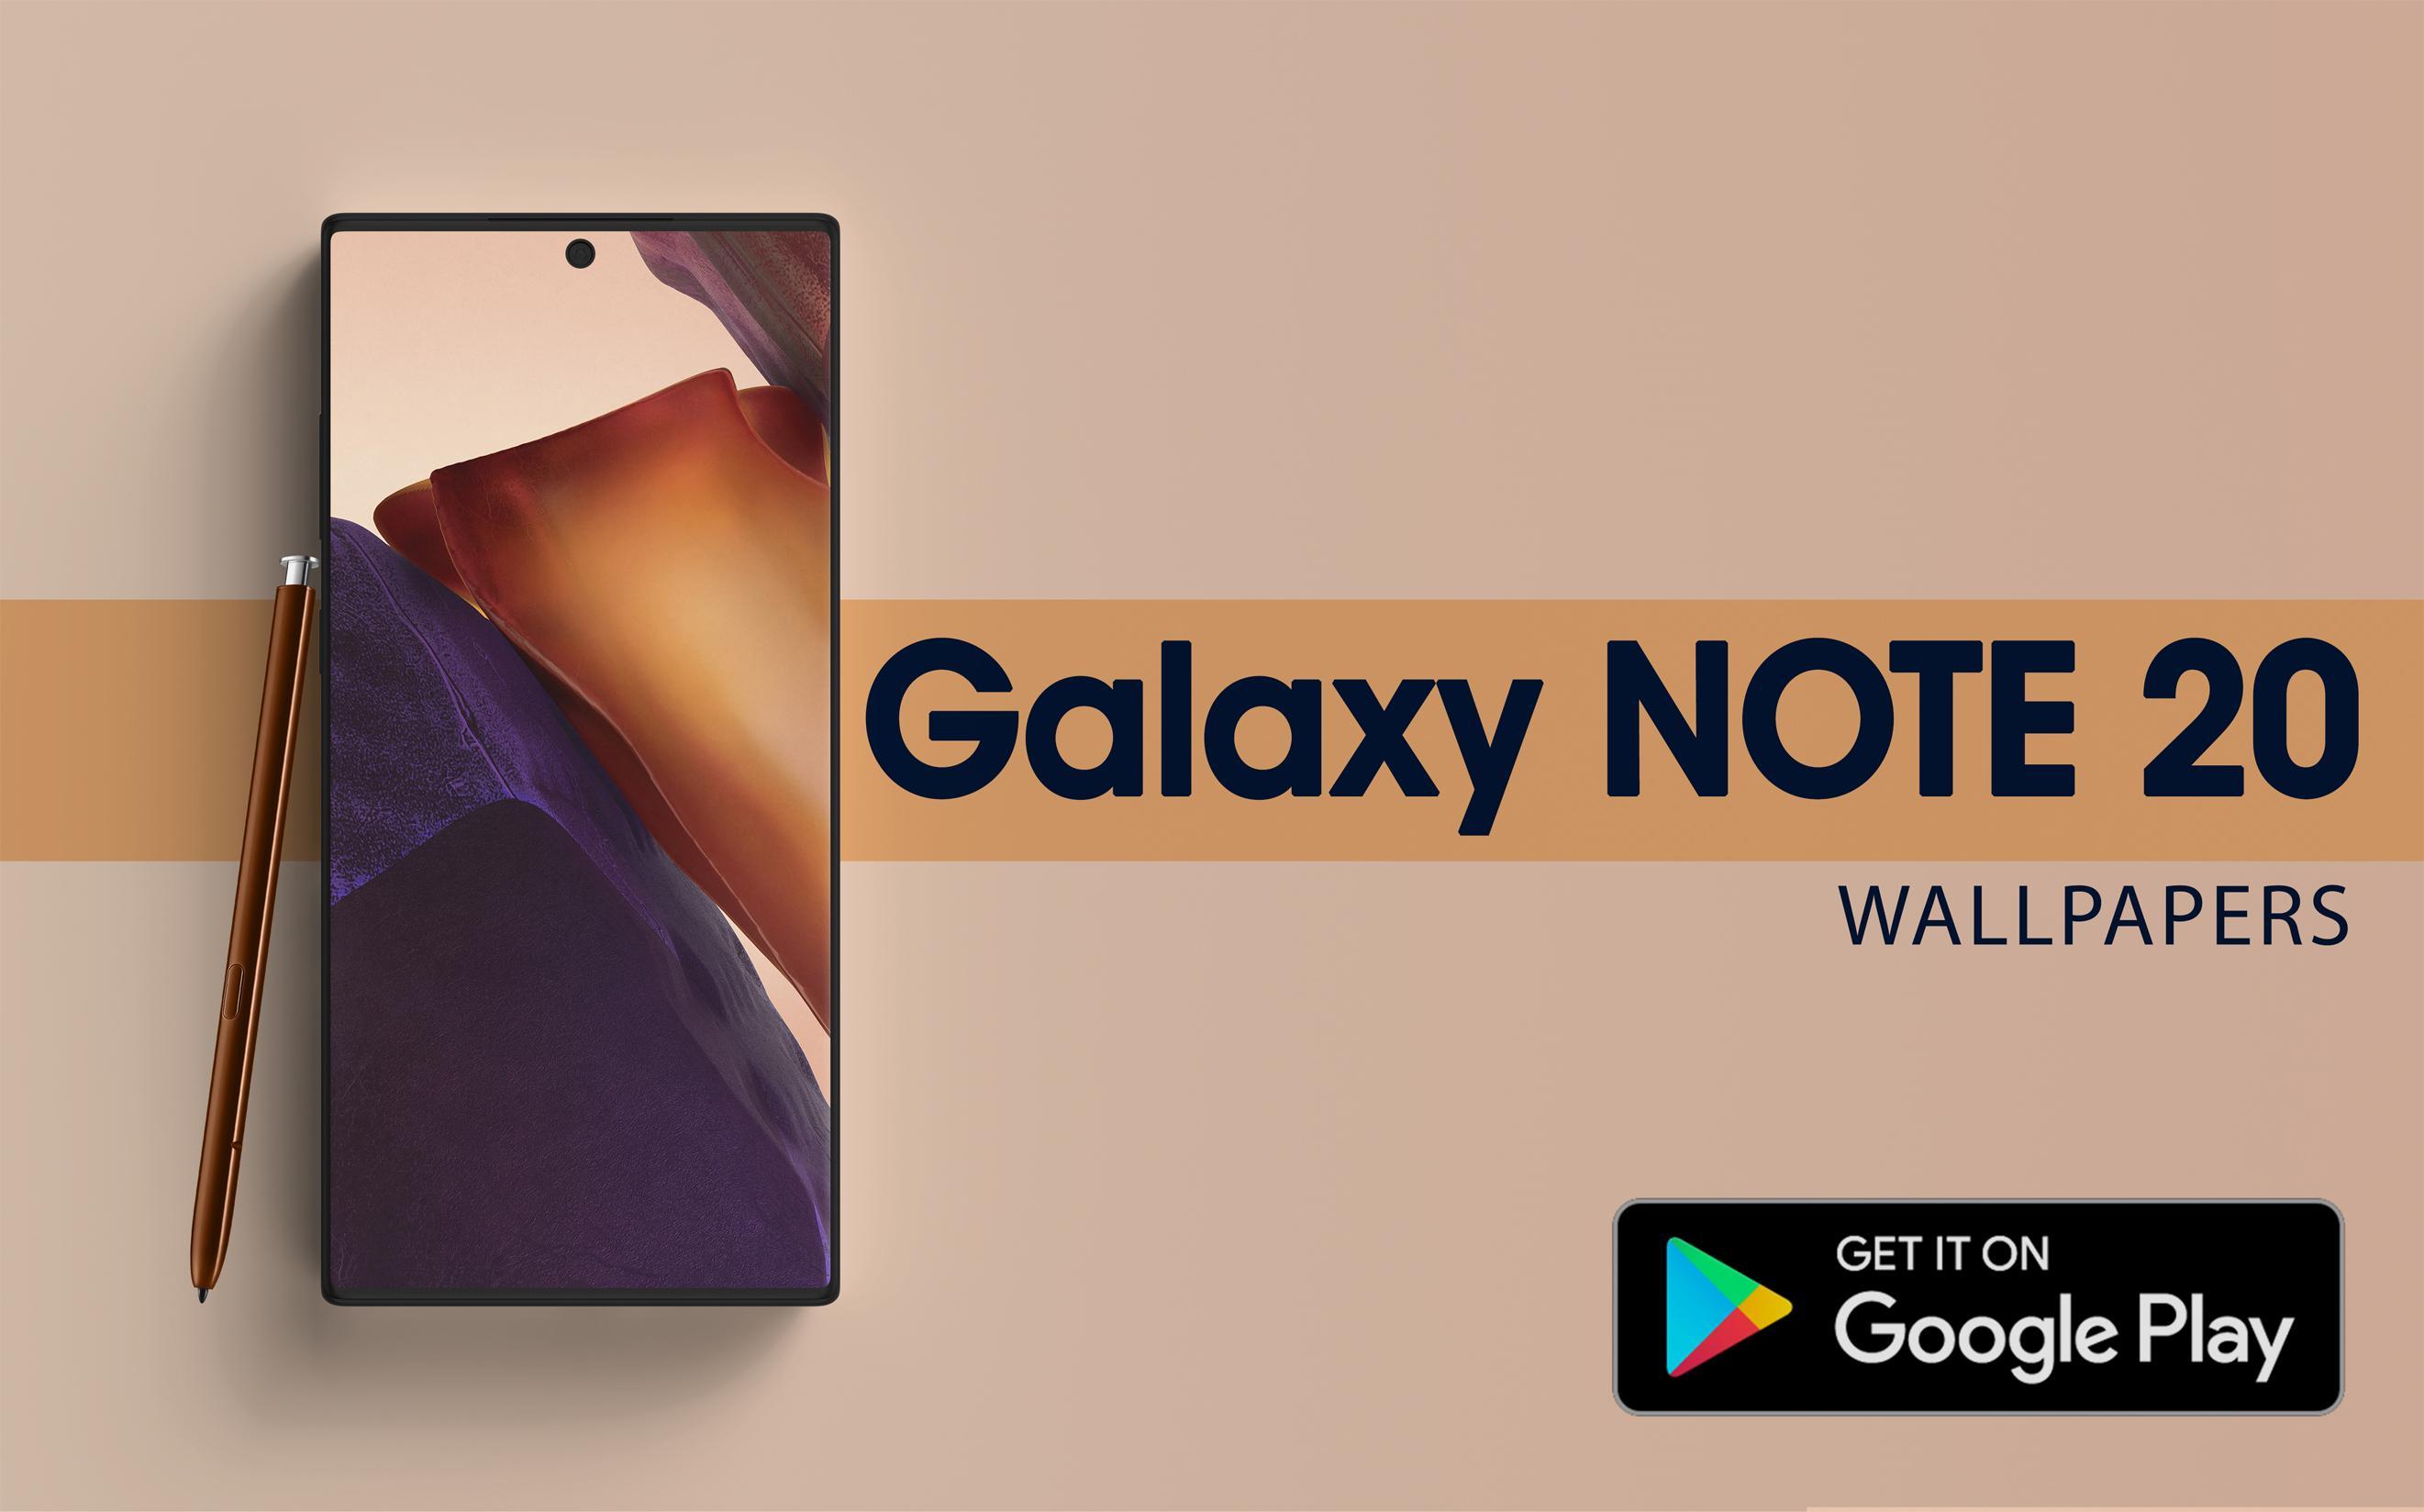 Android 用の Note Wallpaper Galaxy Note Ultra Wallpaper Apk をダウンロード